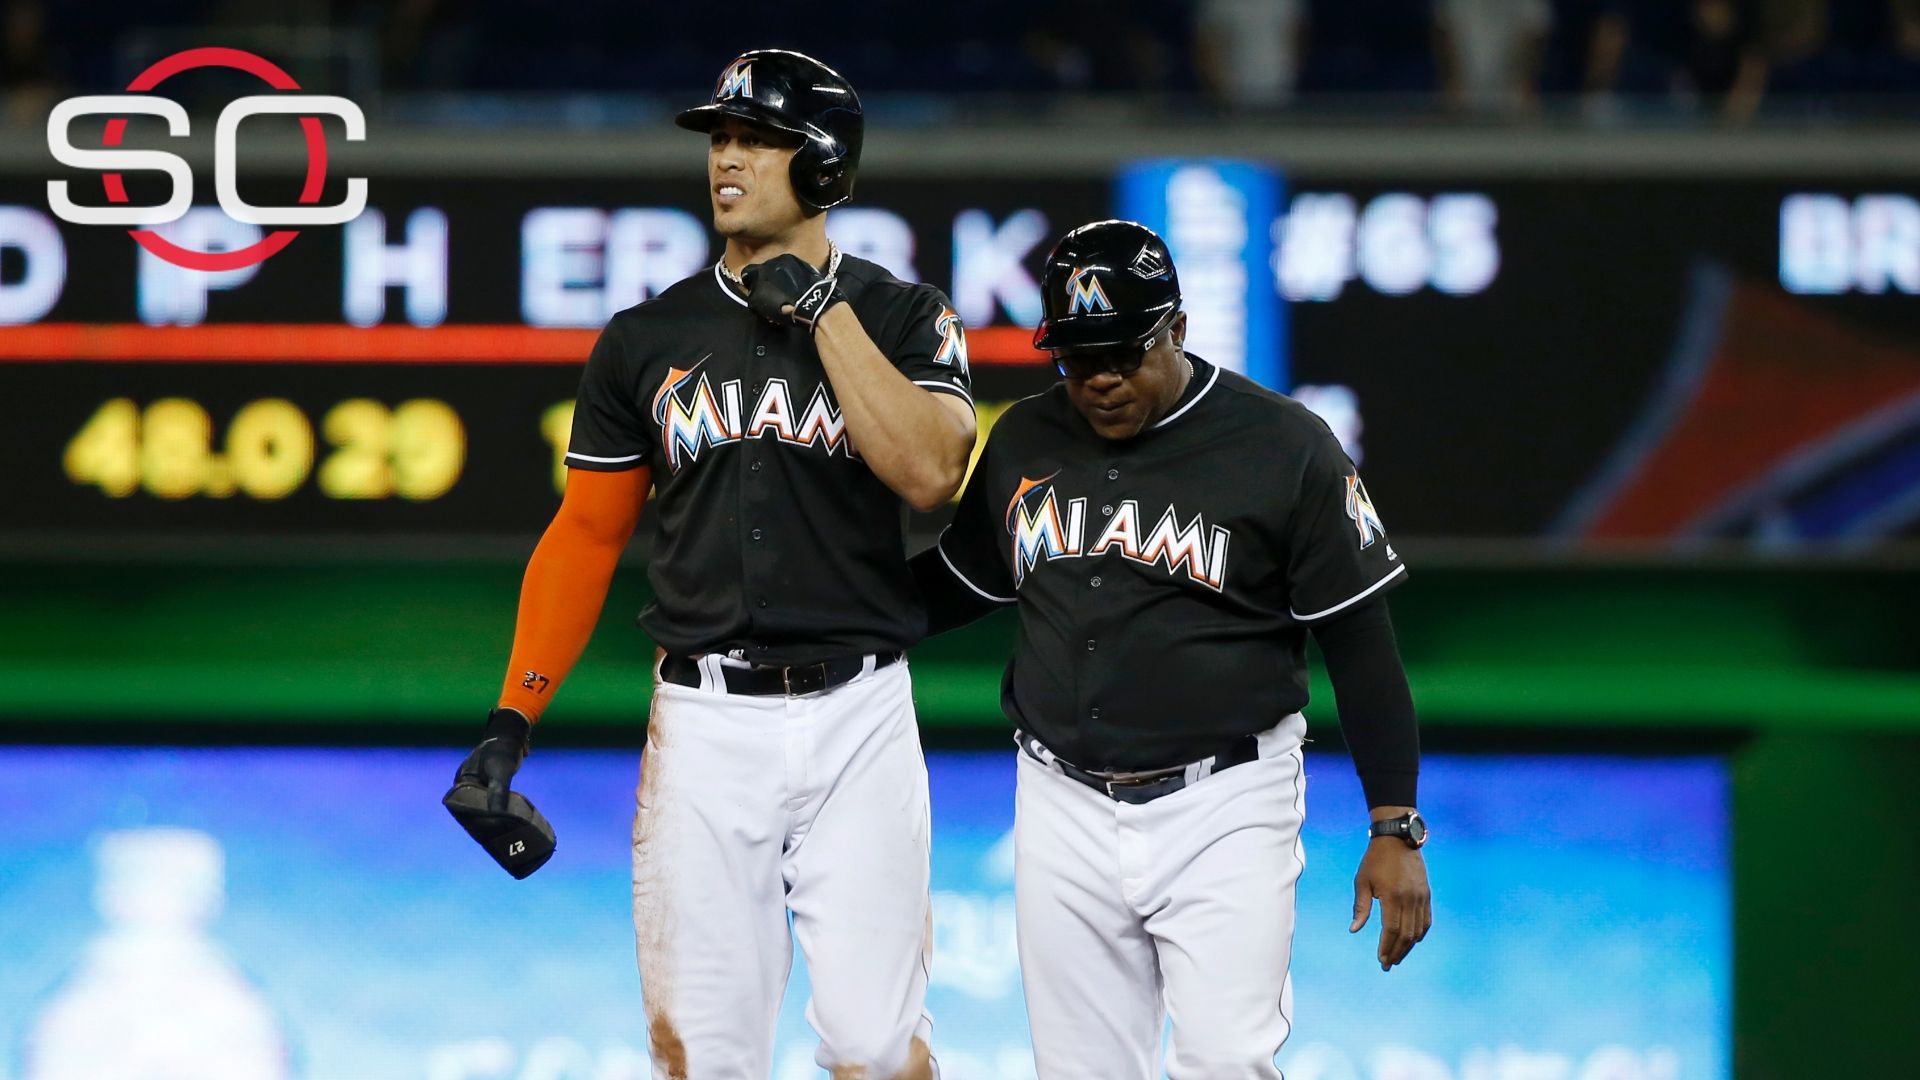 Marlins outfielder Giancarlo Stanton heads to disabled list